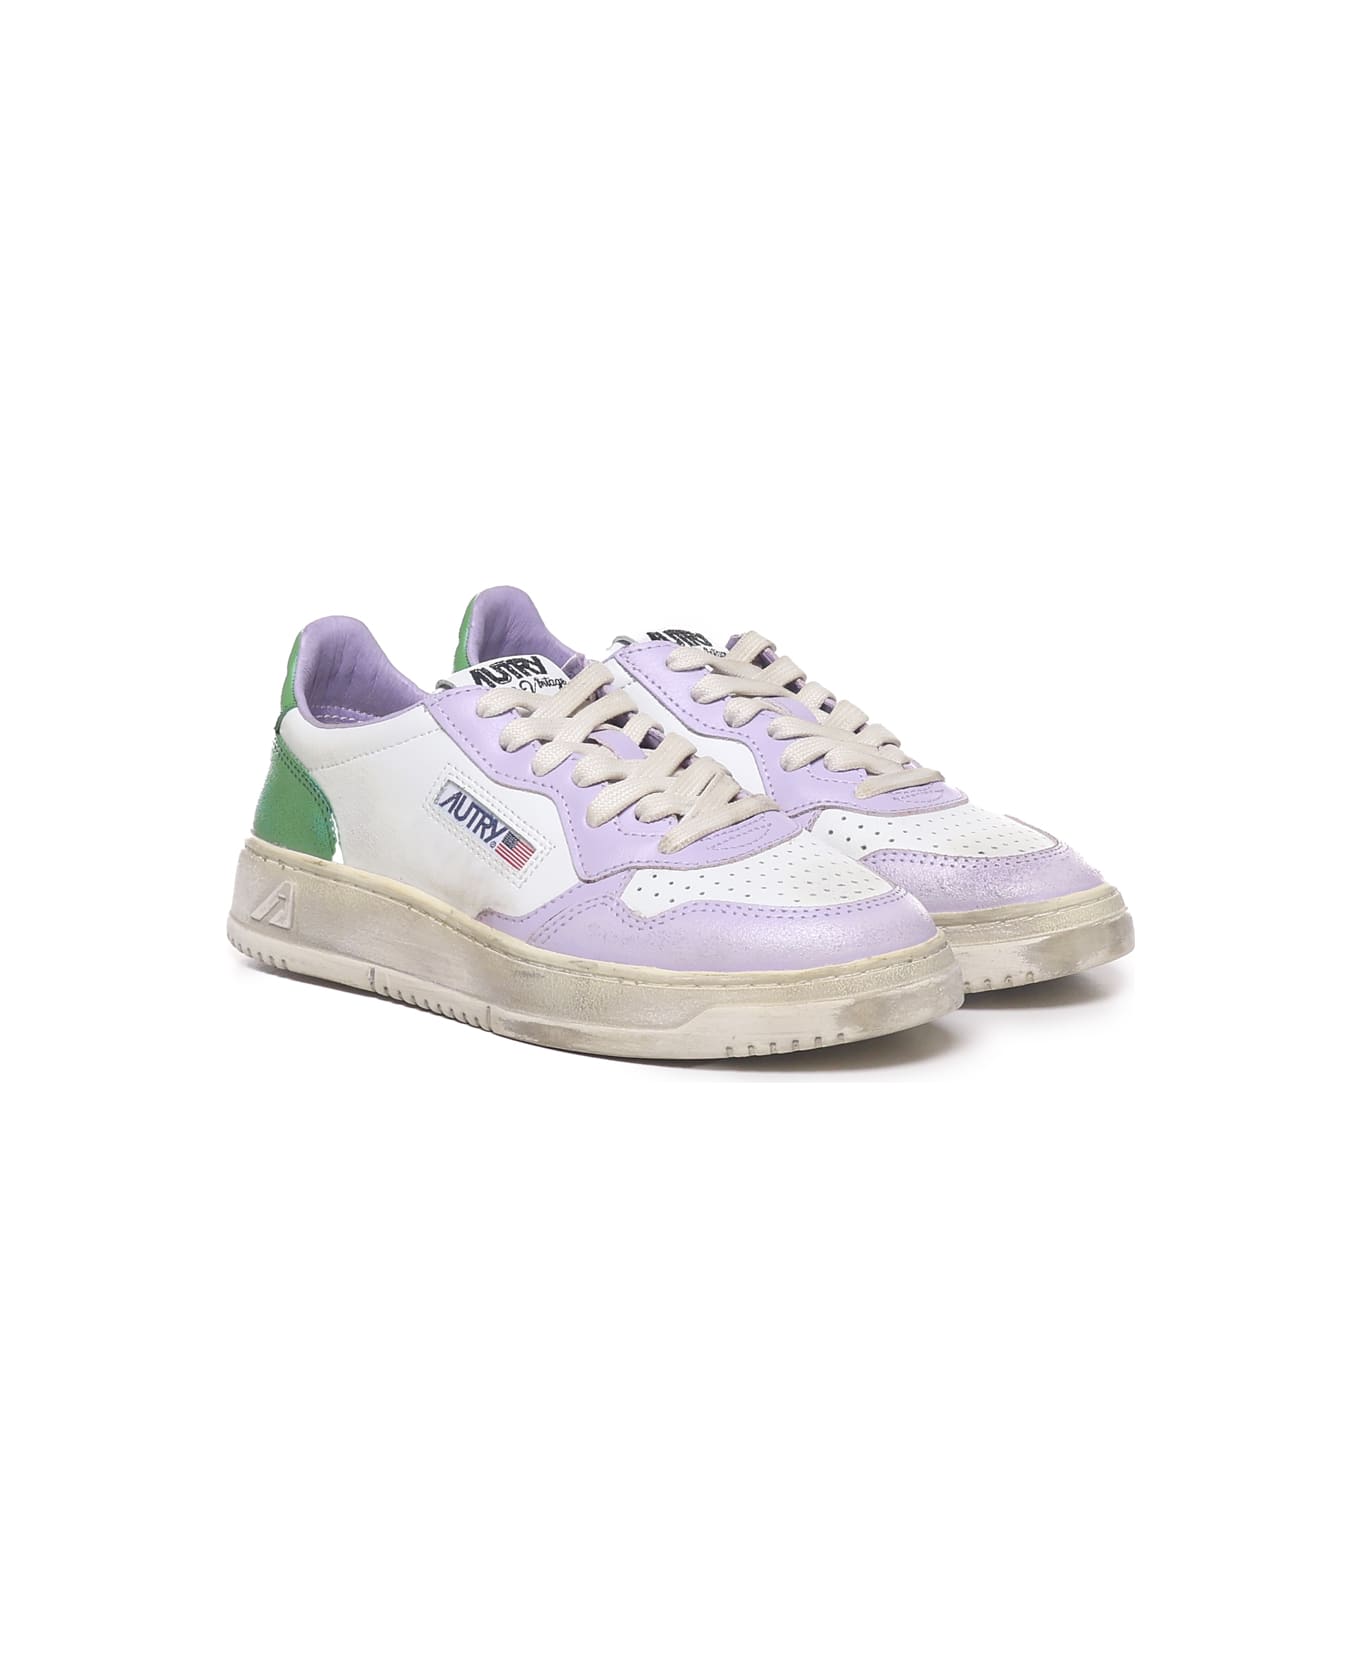 Autry 'medalist Low Super Vintage' Sneakers - White, lillac, green